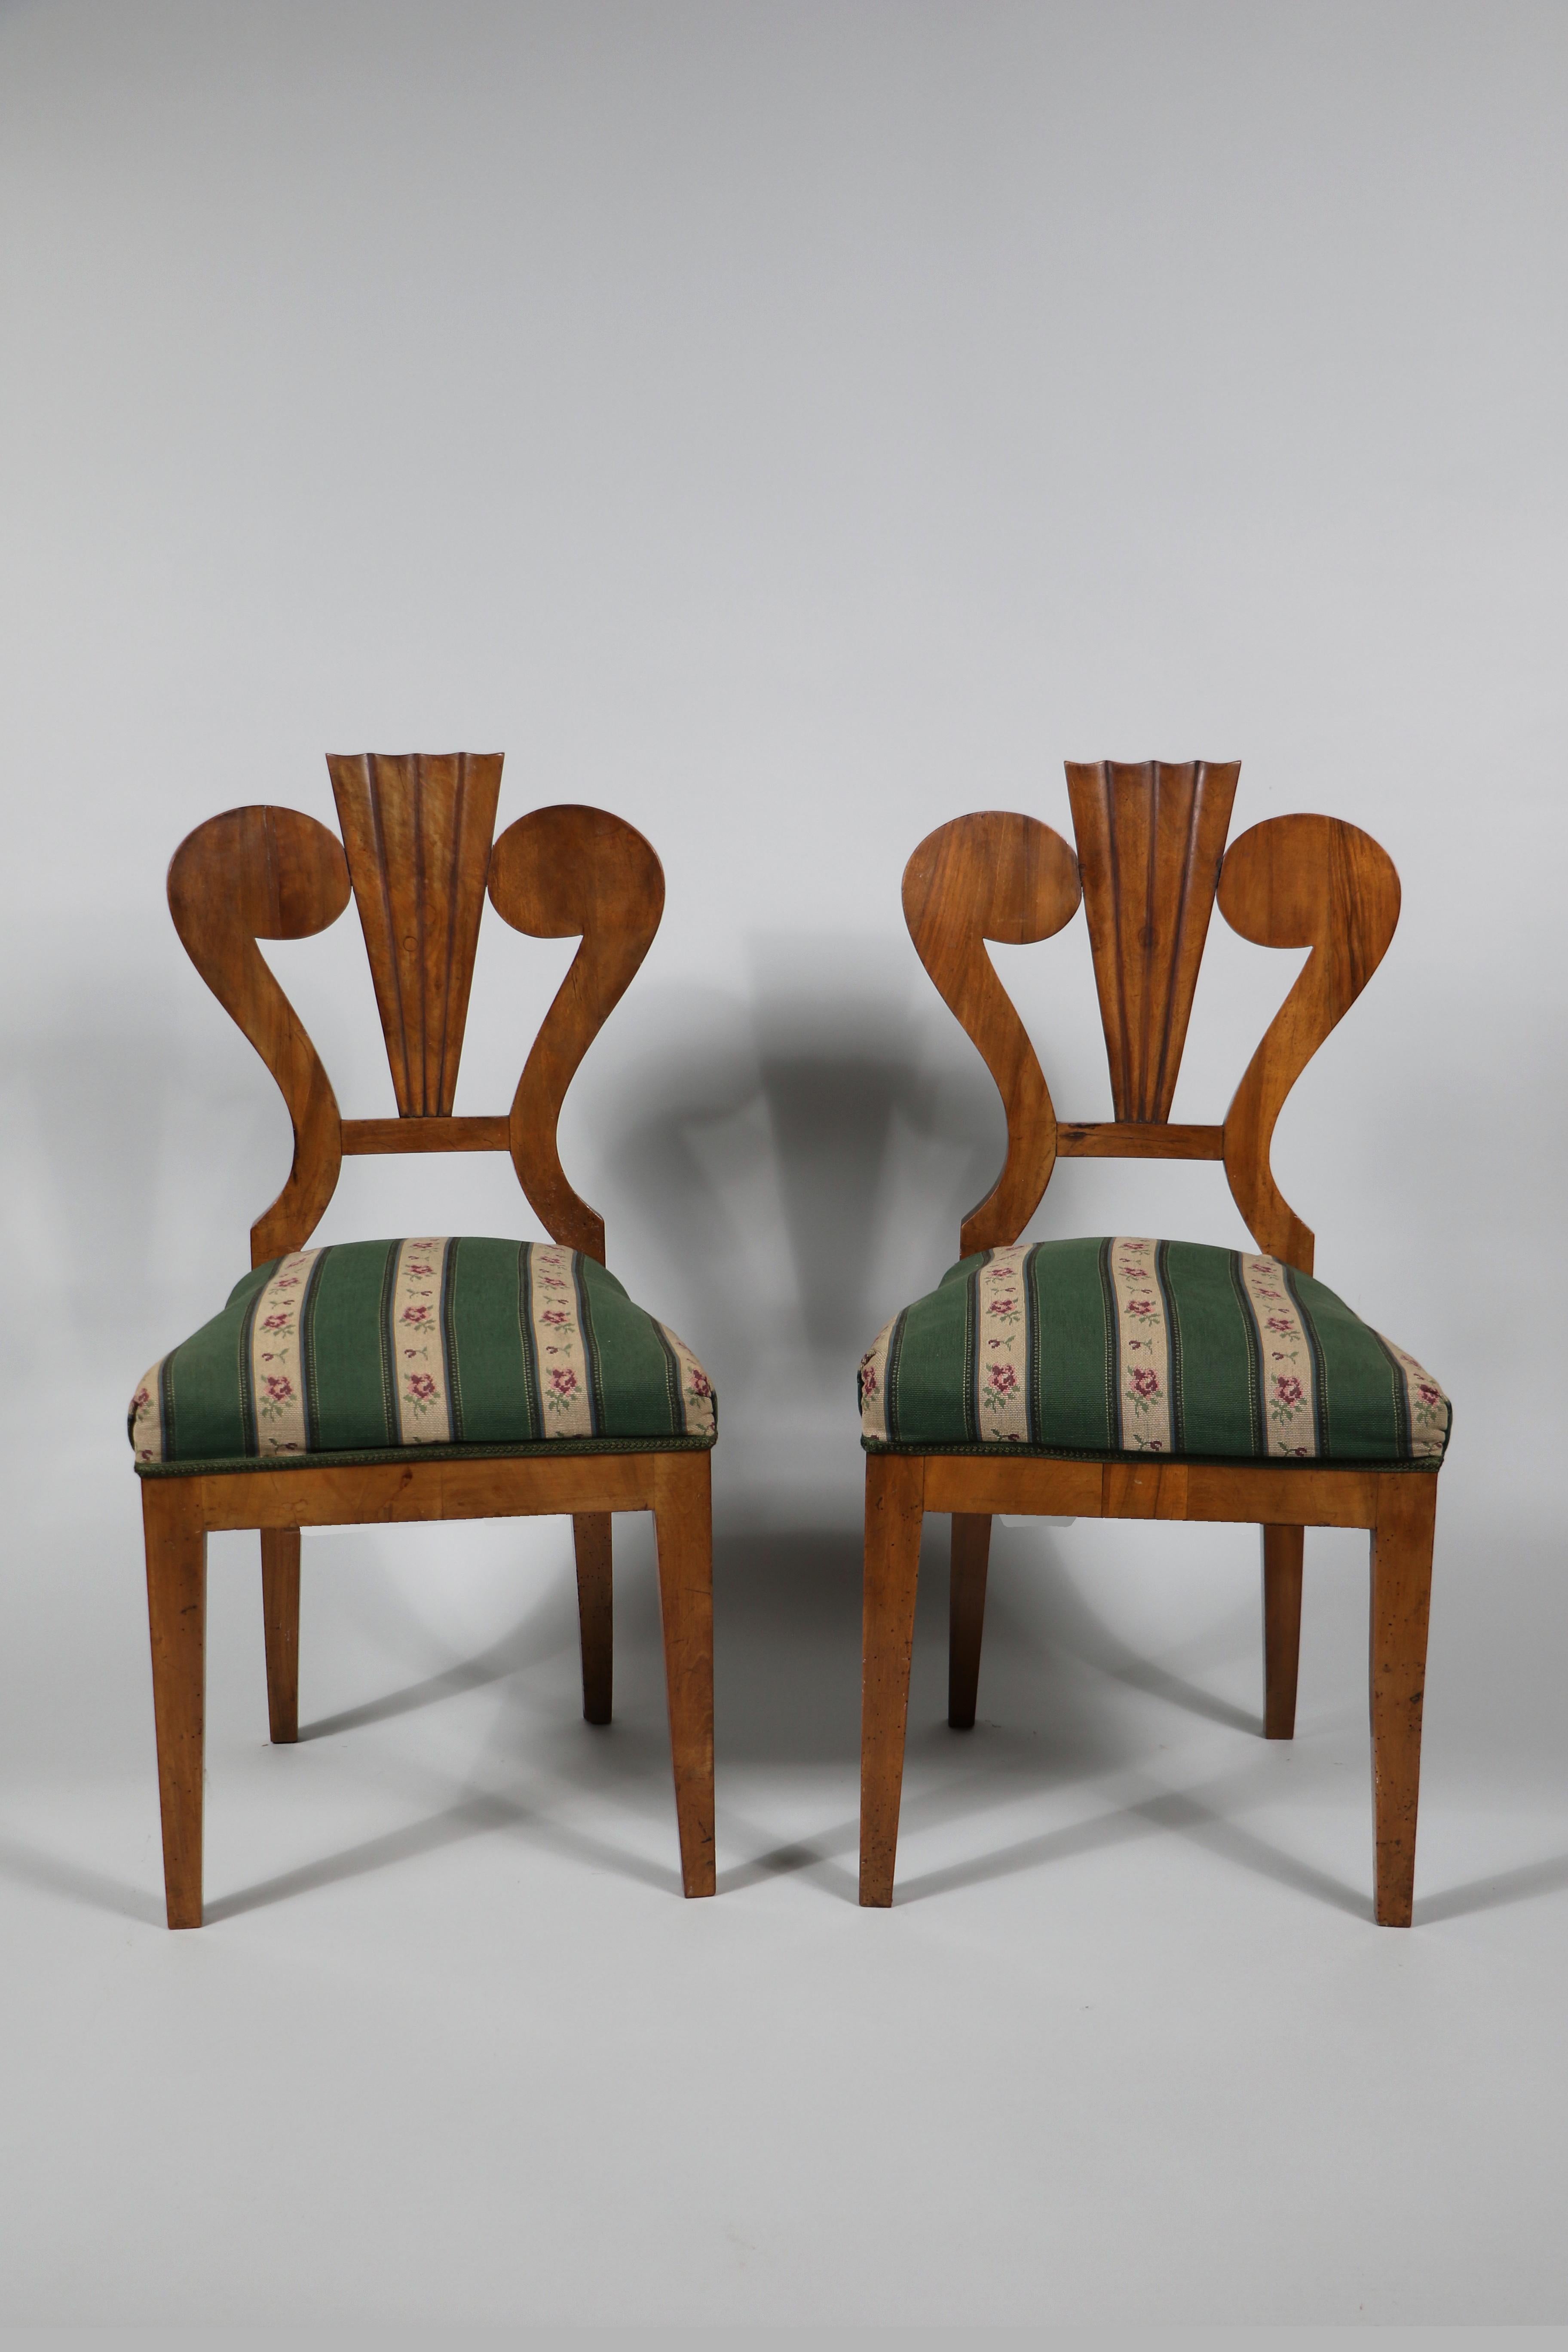 Hello,
These fine and rare Biedermeier chairs were made in Vienna circa 1825.

Viennese Biedermeier pieces are distinguished by their sophisticated proportions, rare and refined design, excellent craftsmanship and continue to have a great influence